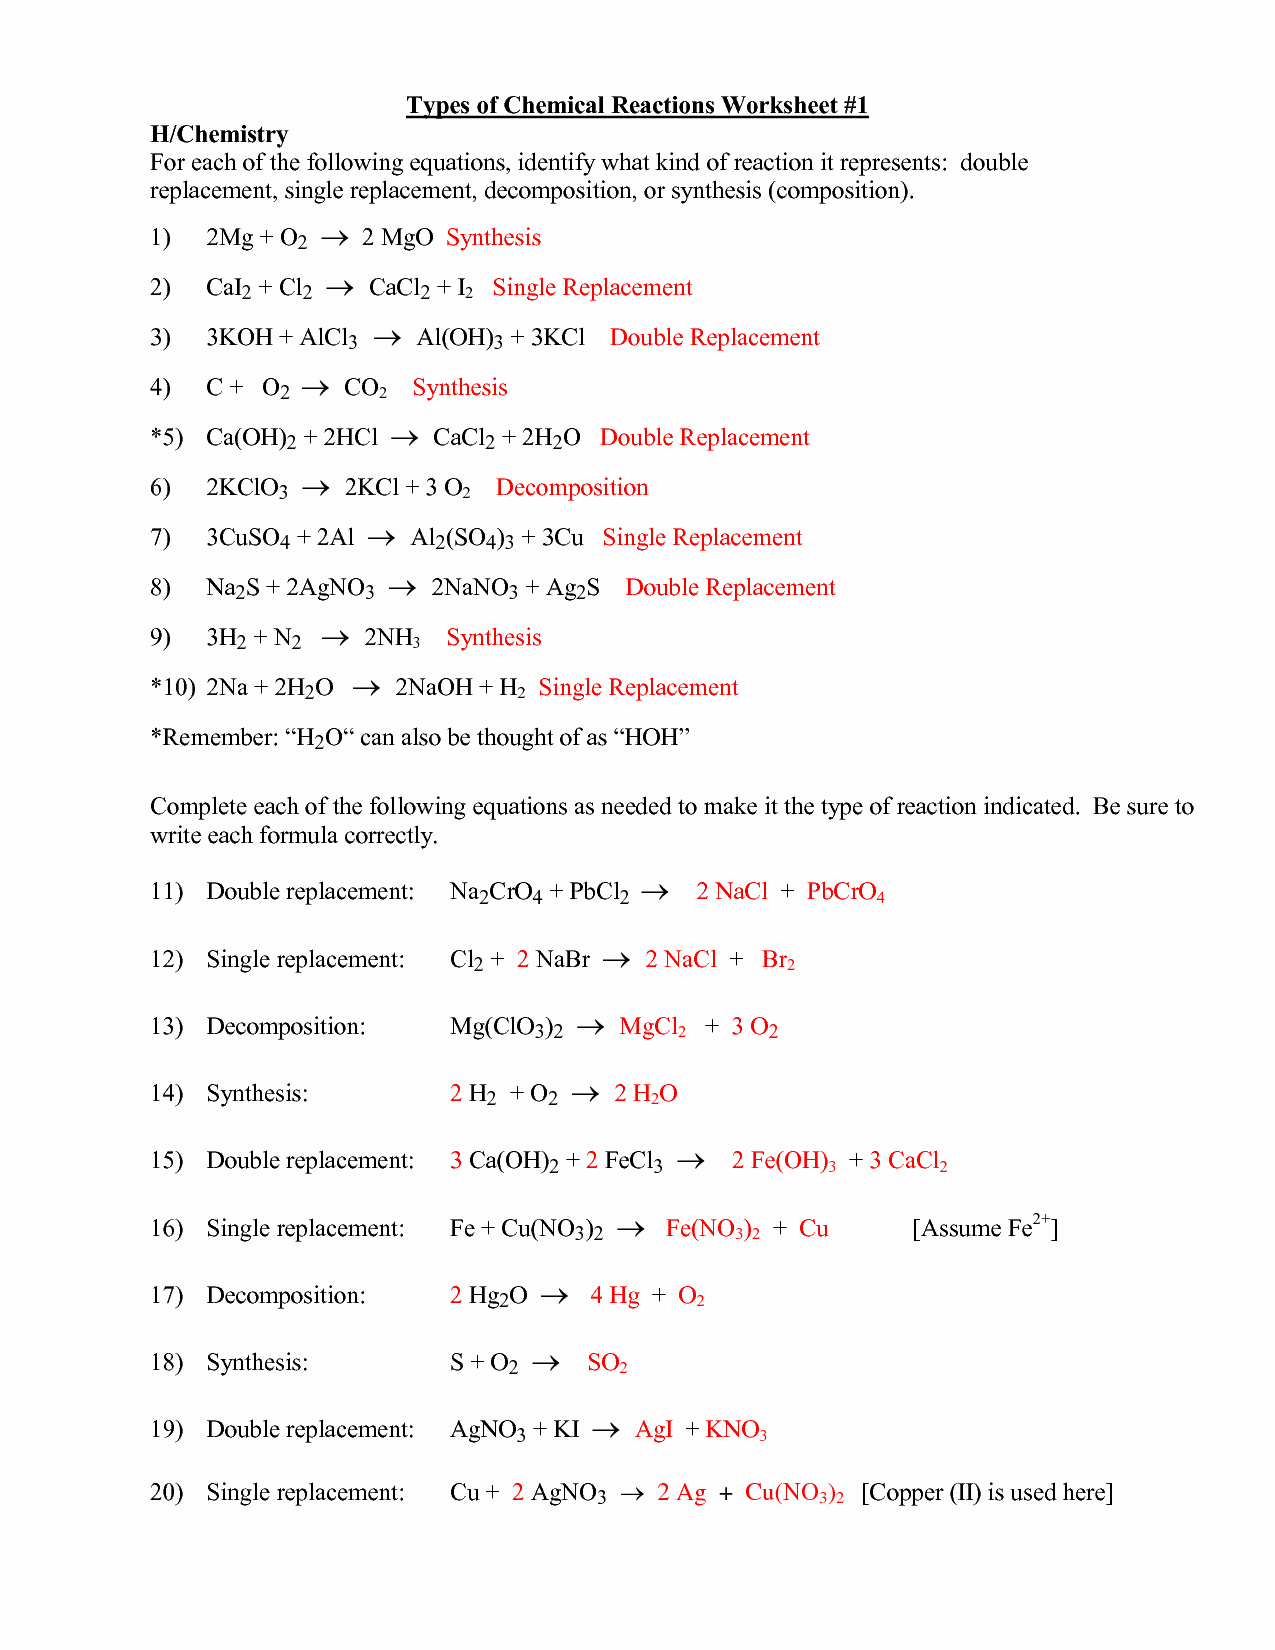 Chemical Reactions Worksheet Answers Inspirational 16 Best Of Types Chemical Reactions Worksheets